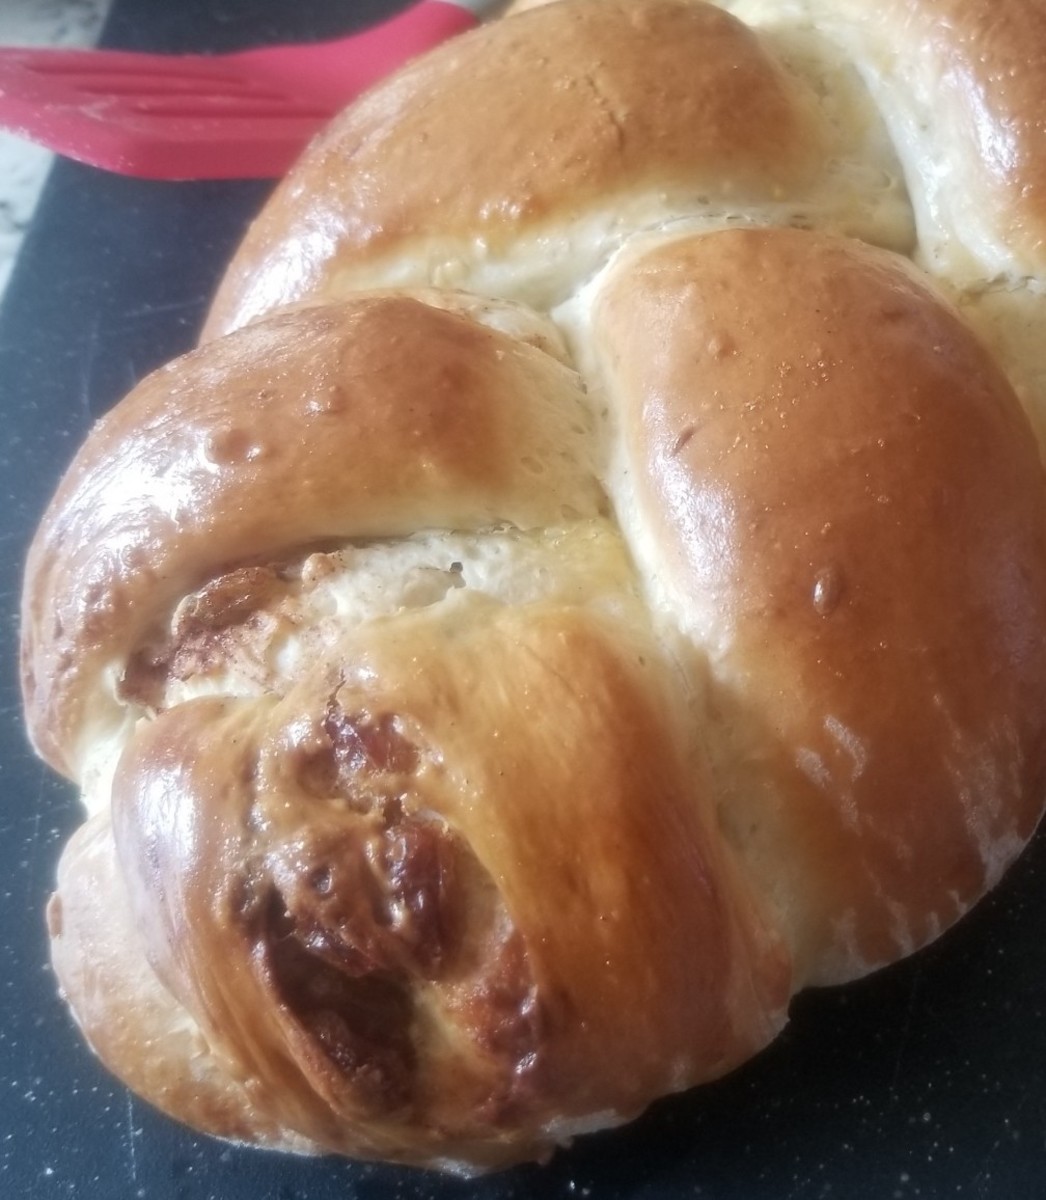 This challah is pretty enough to serve for company, but you might not want to share it. Either way, there won't be any leftovers!